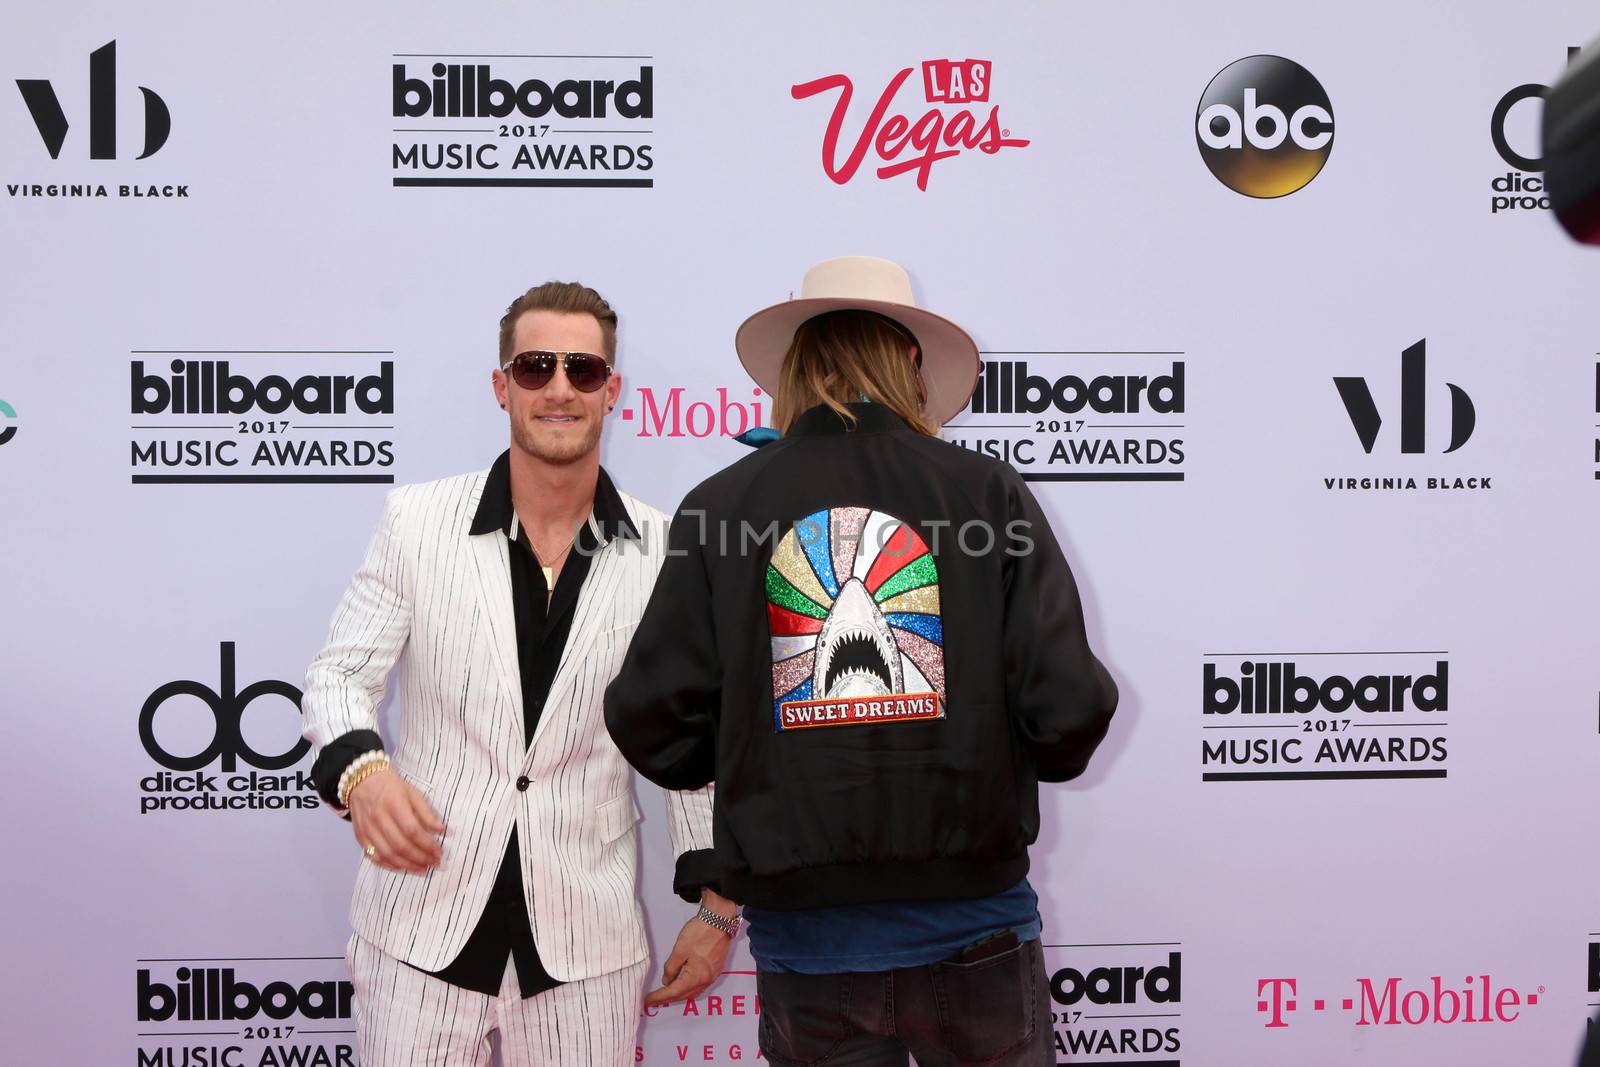 Florida Georgia Line, Tyler Hubbard, Brian Kelley
at the 2017 Billboard Awards Arrivals, T-Mobile Arena, Las Vegas, NV 05-21-17/ImageCollect by ImageCollect